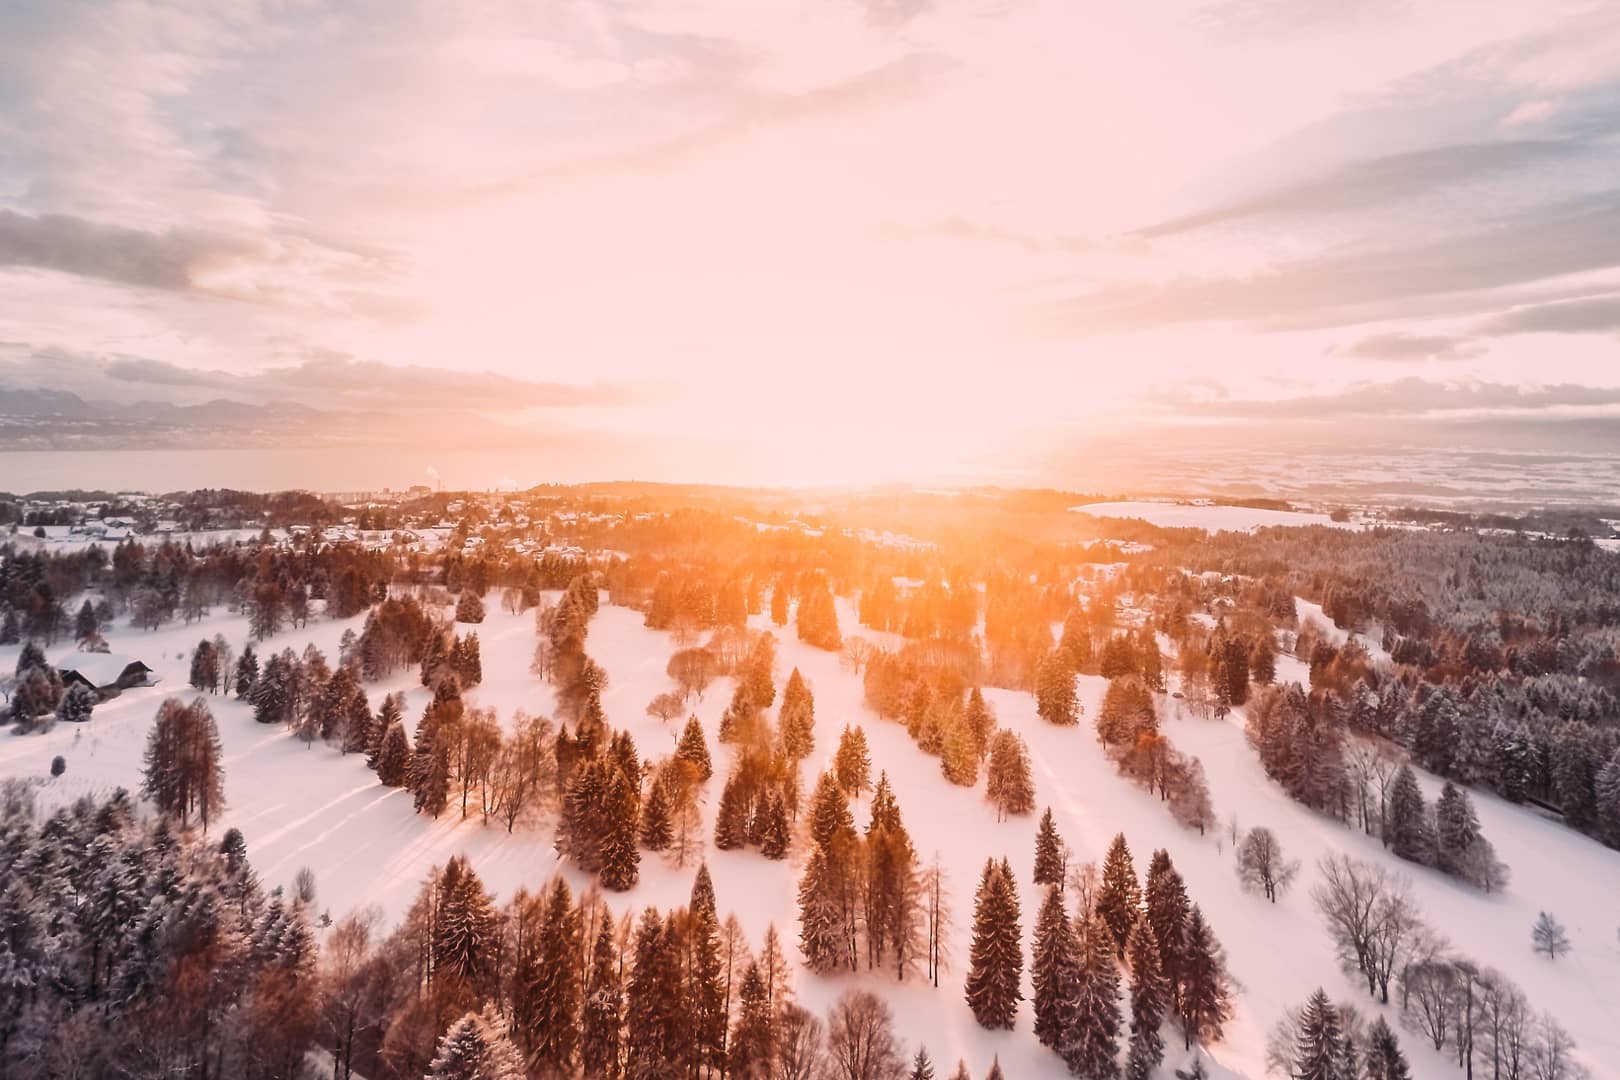 Snow covered landscape with trees and a sun rising on the horizon